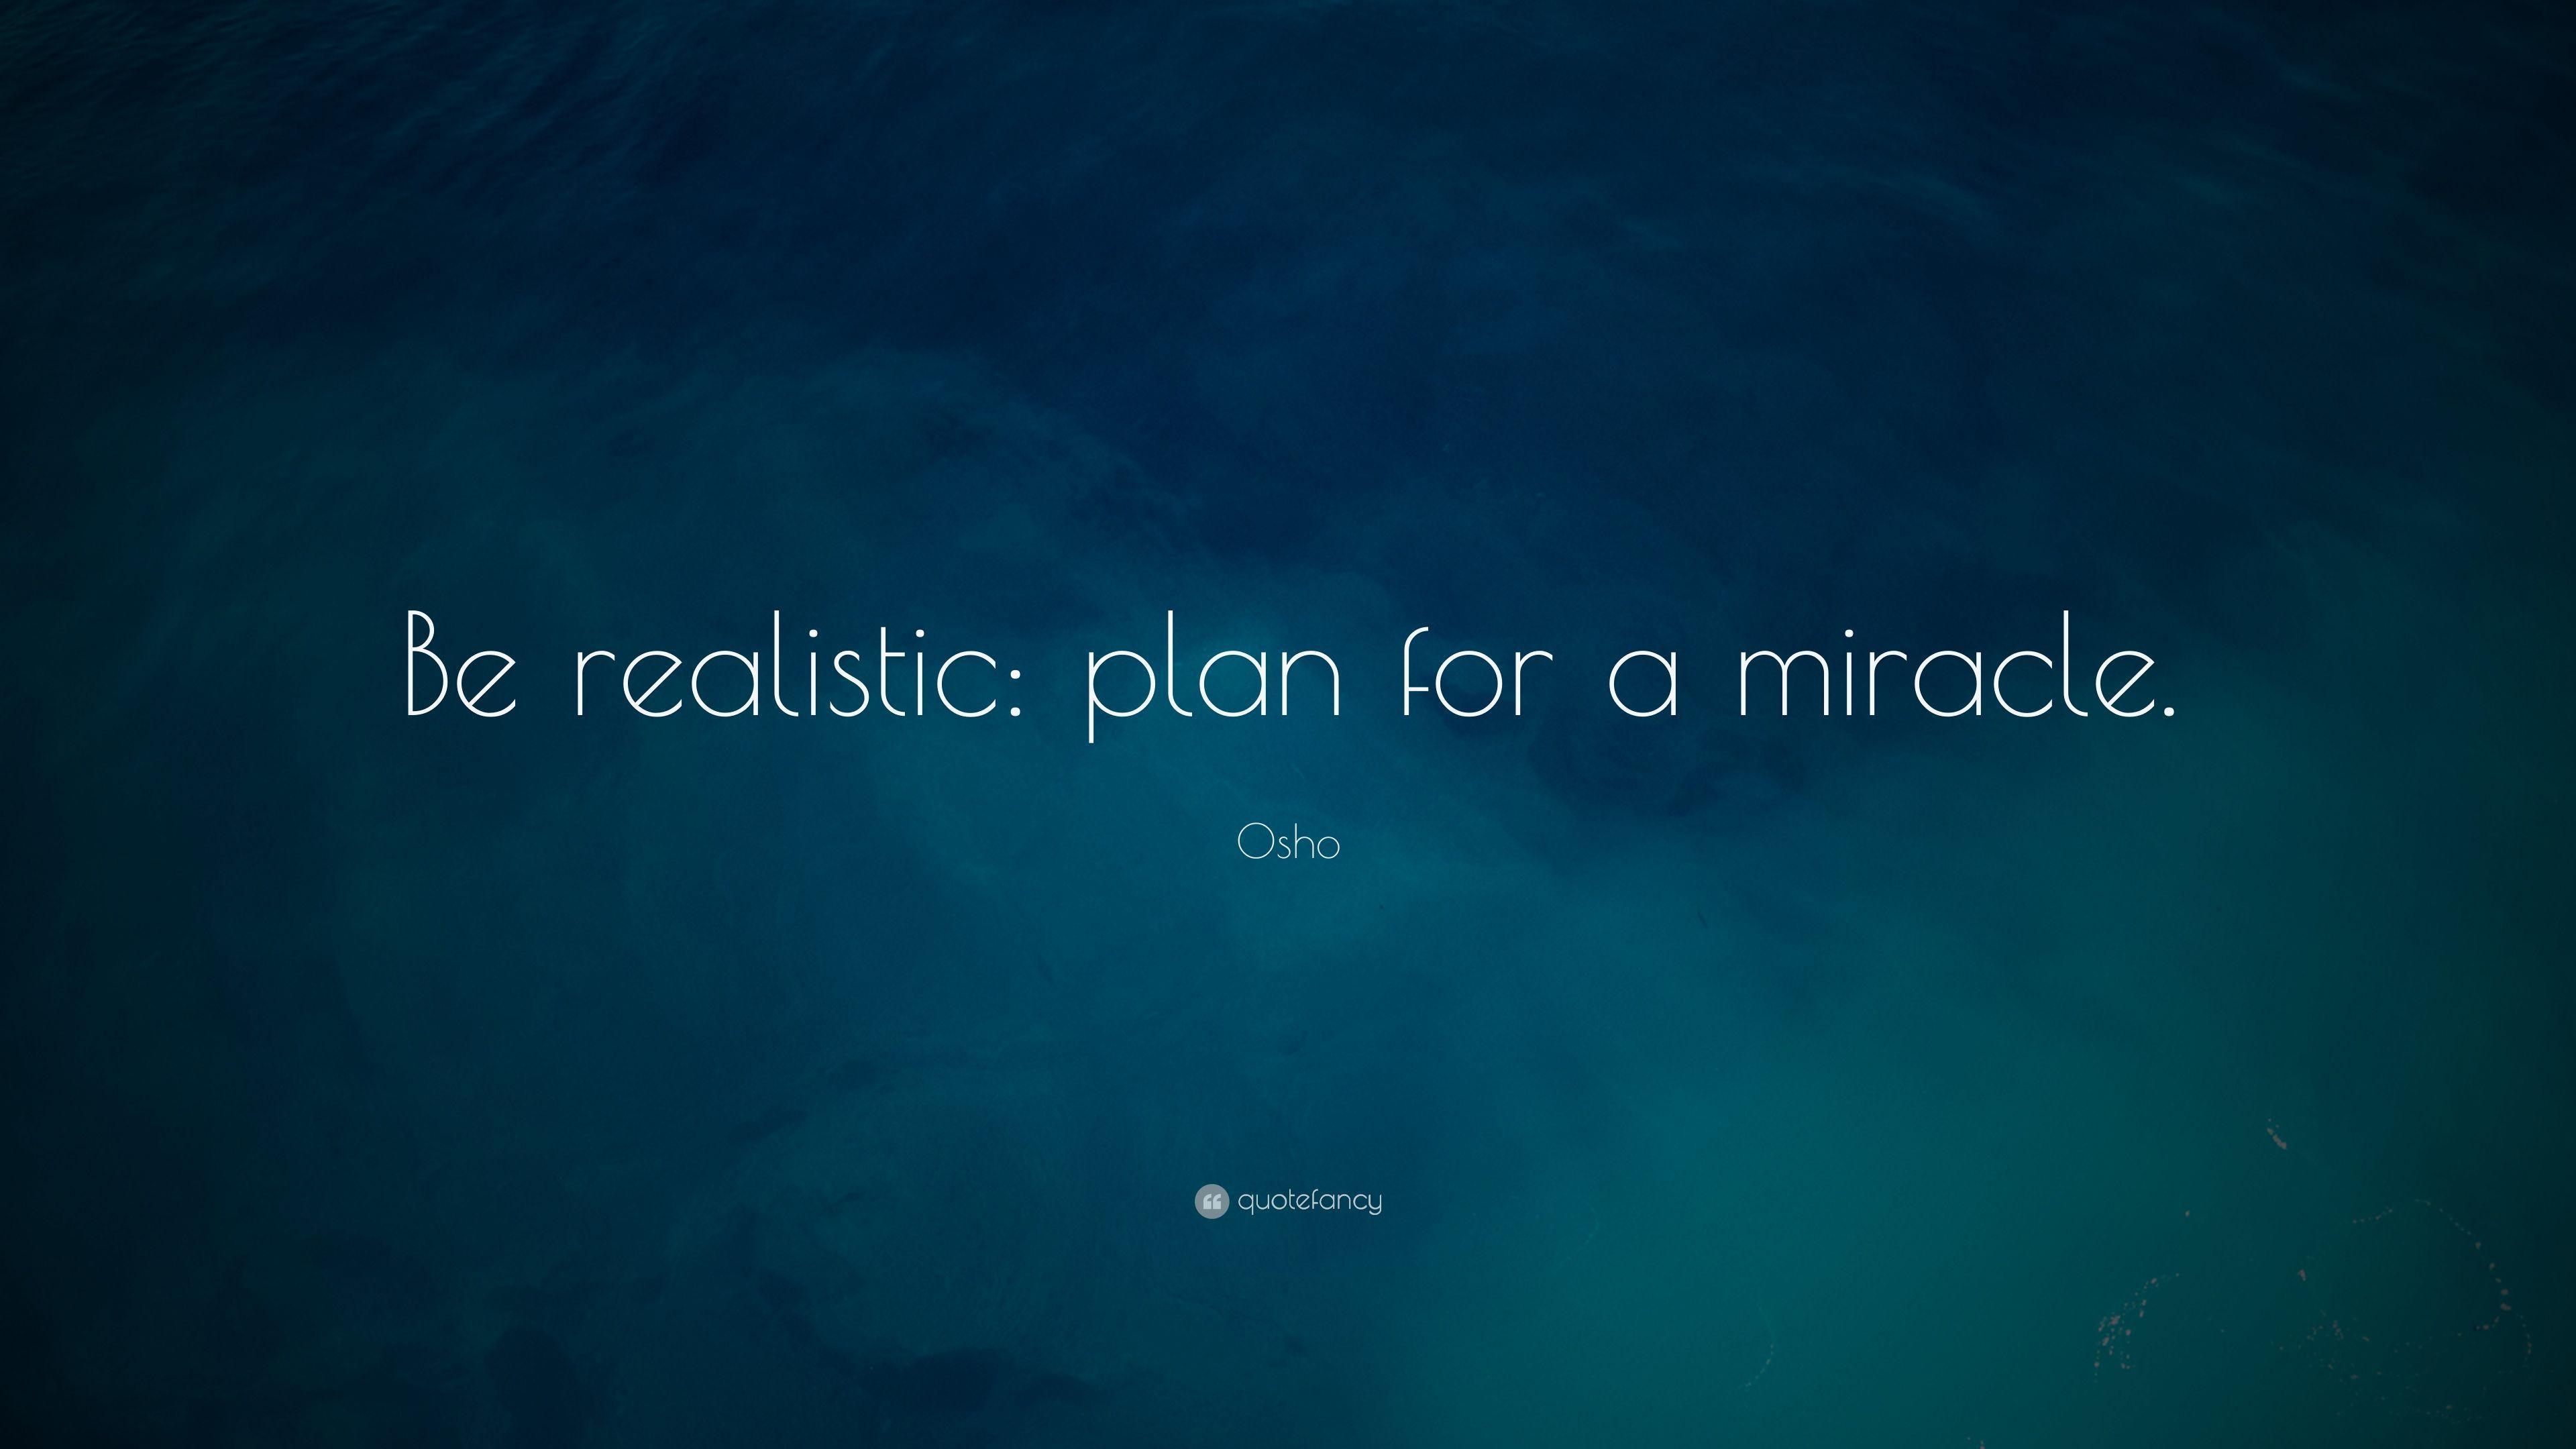 Osho Quote: “Be realistic: plan for a miracle.” 28 wallpaper